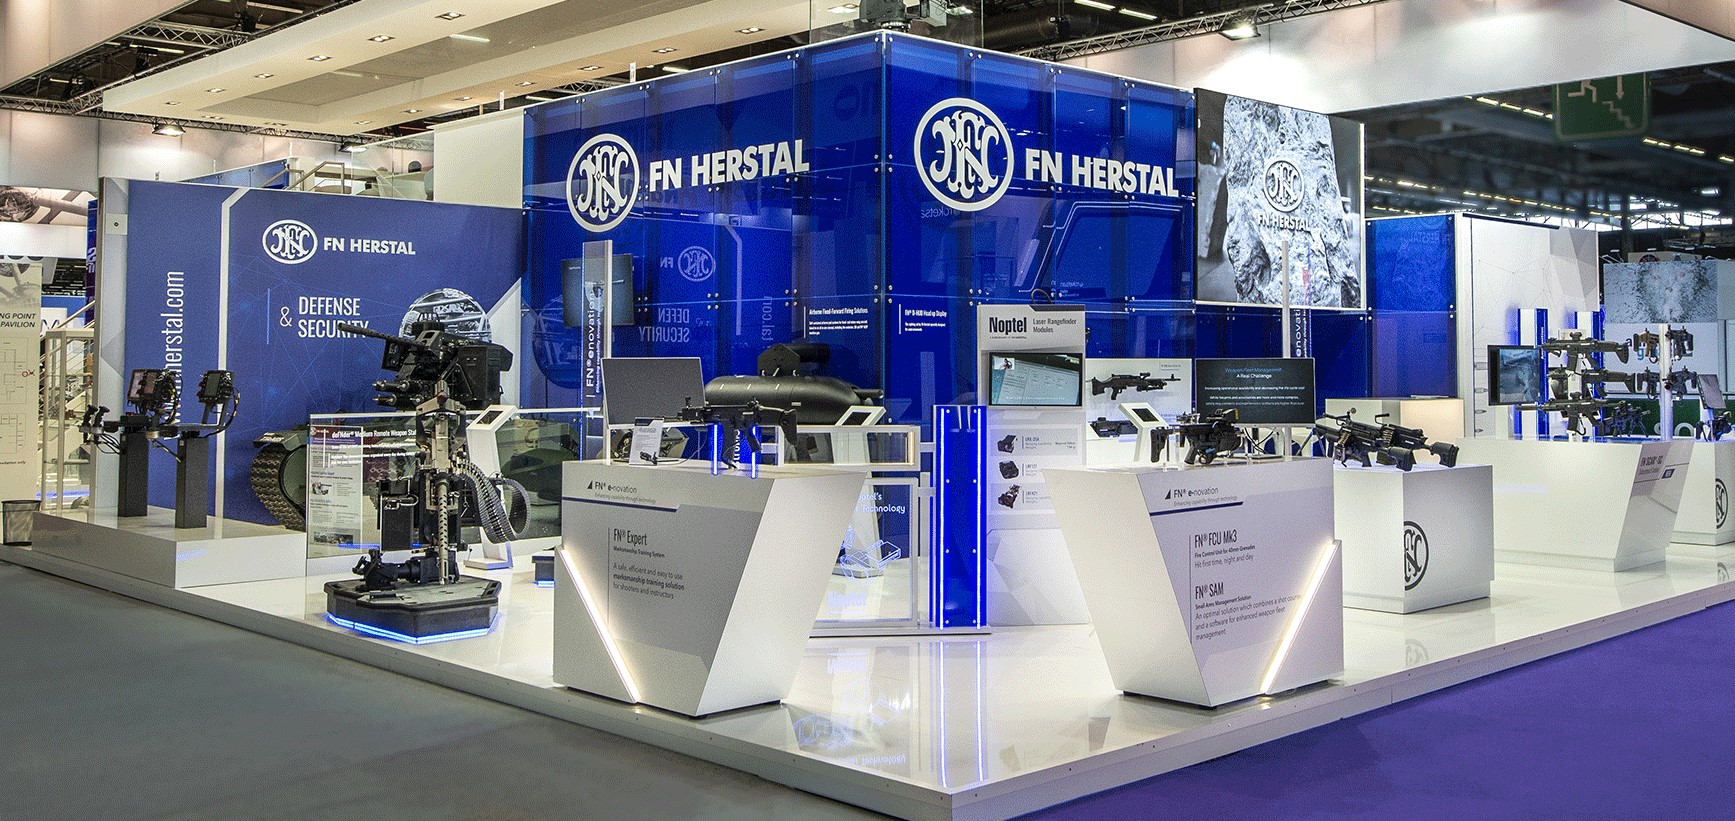 FN Herstal designs and manufactures innovative solutions dedicated to Defence and Security markets.